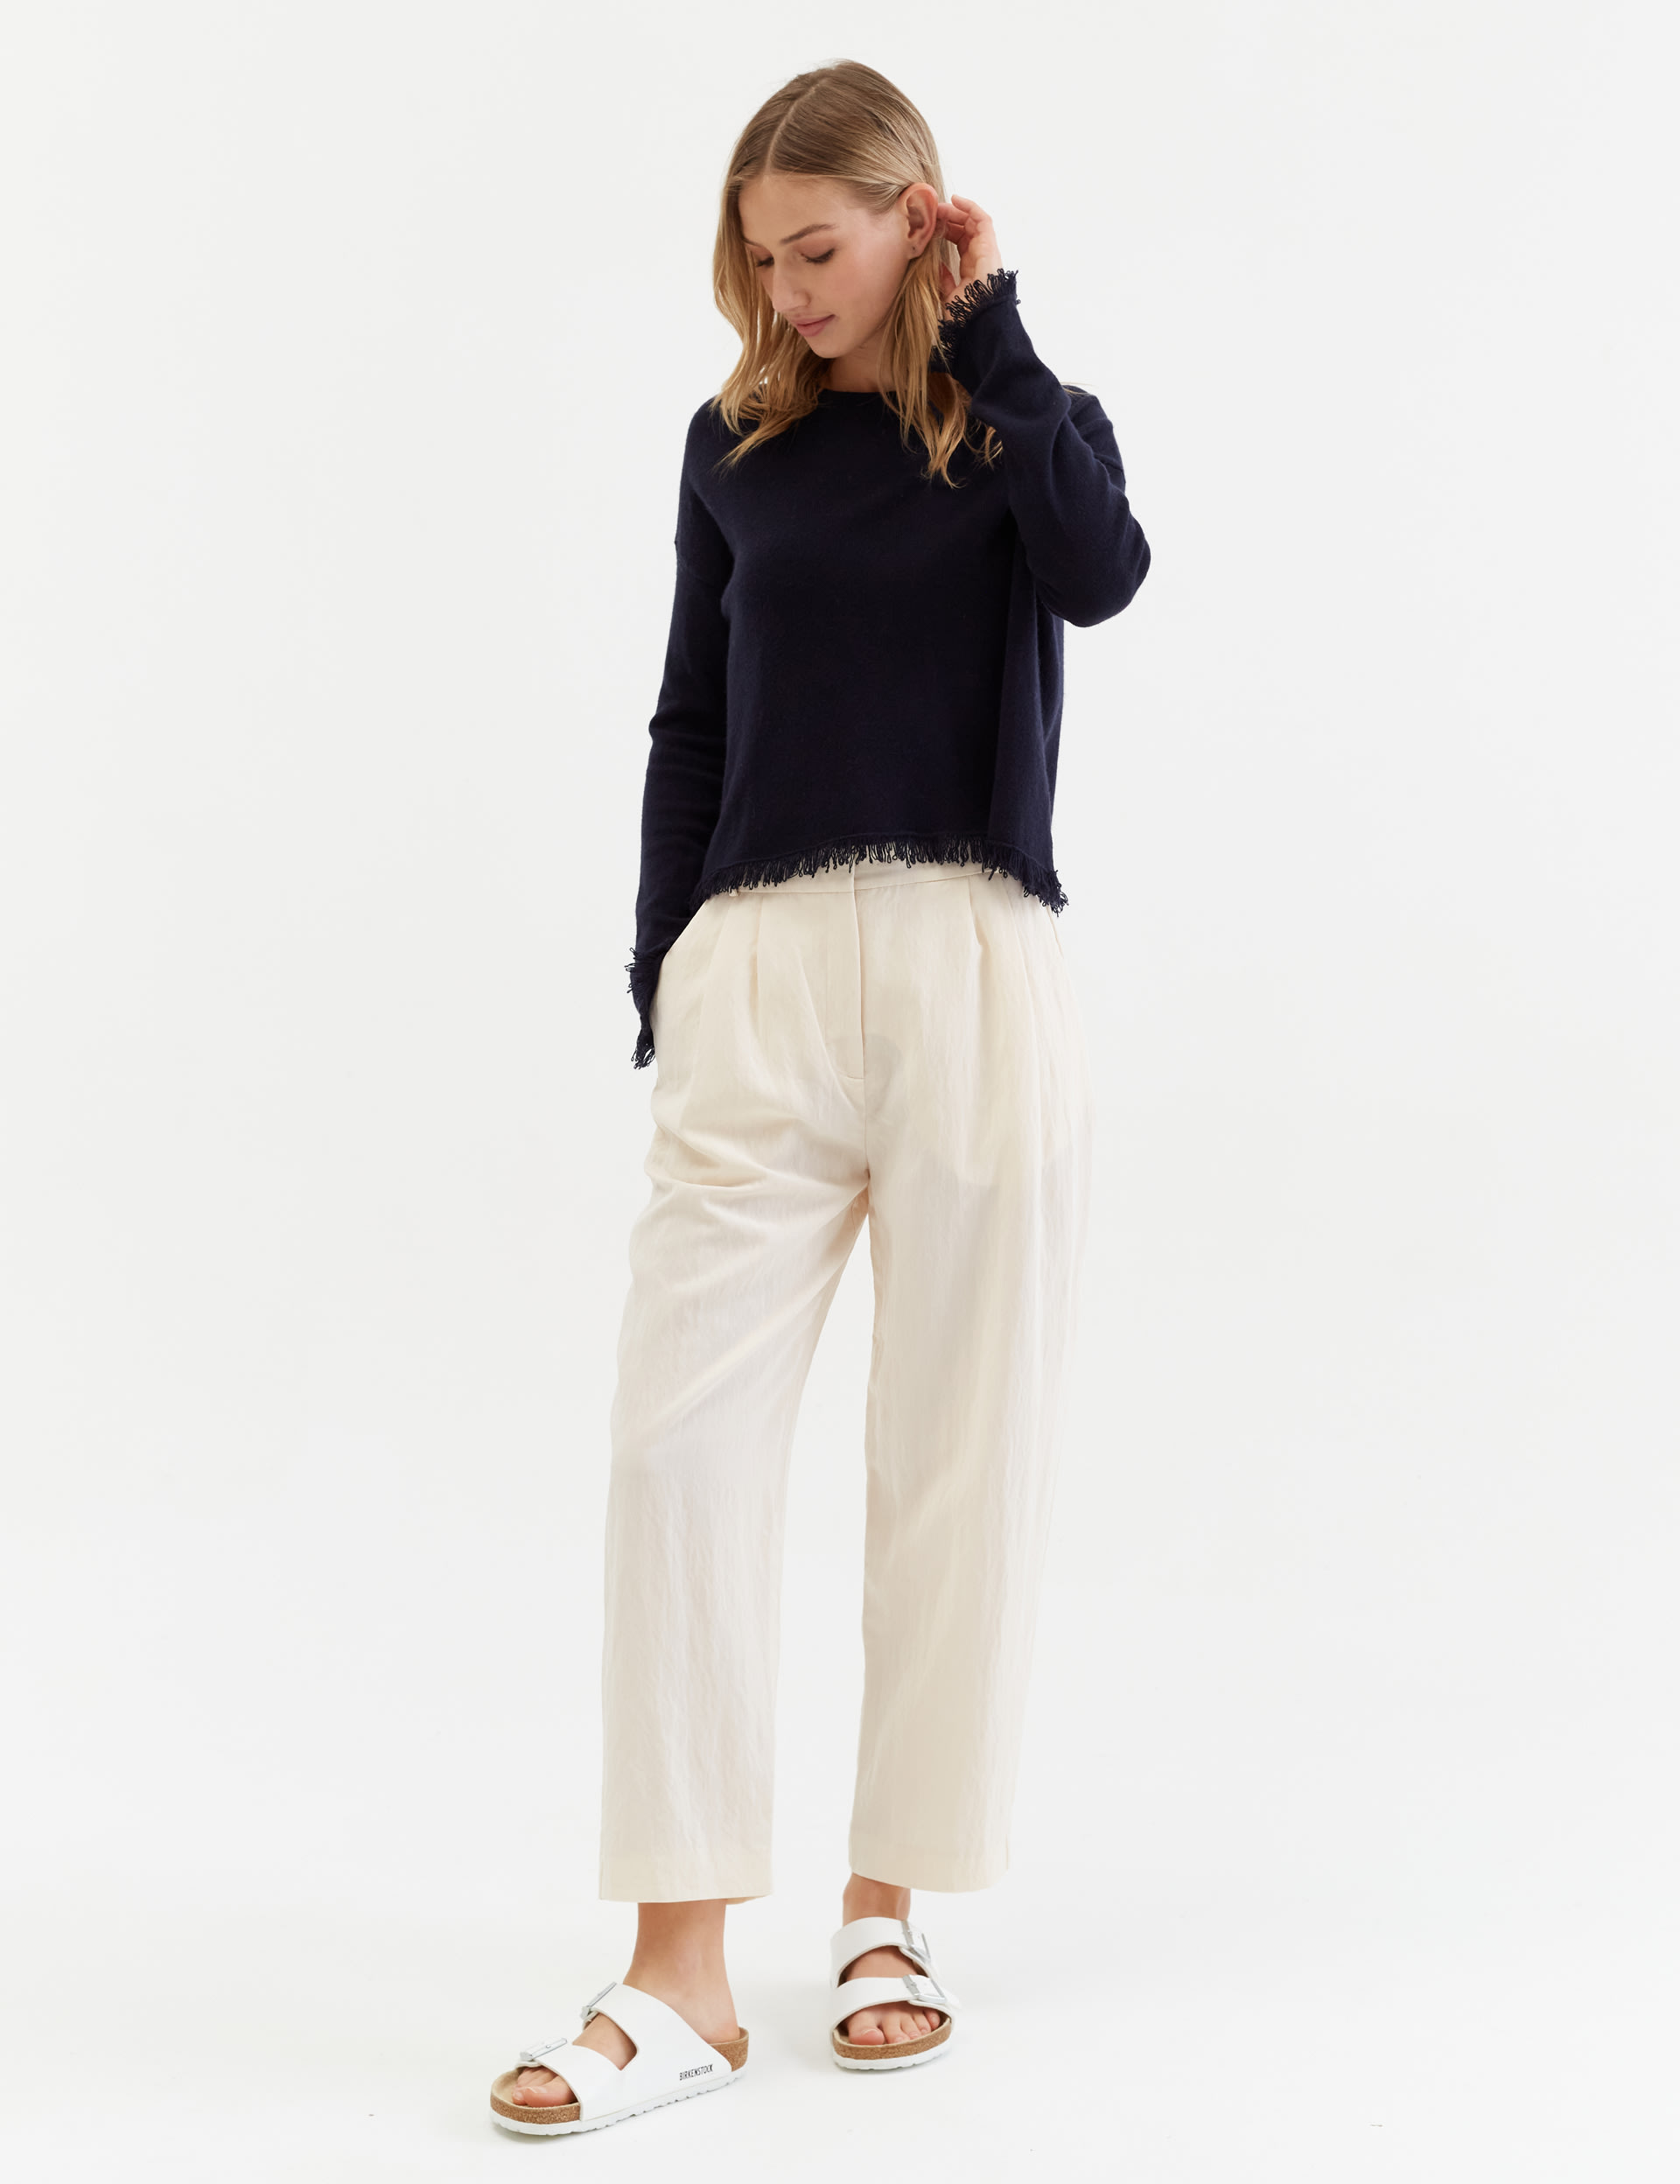 Wool Rich Fringed Jumper with Cashmere